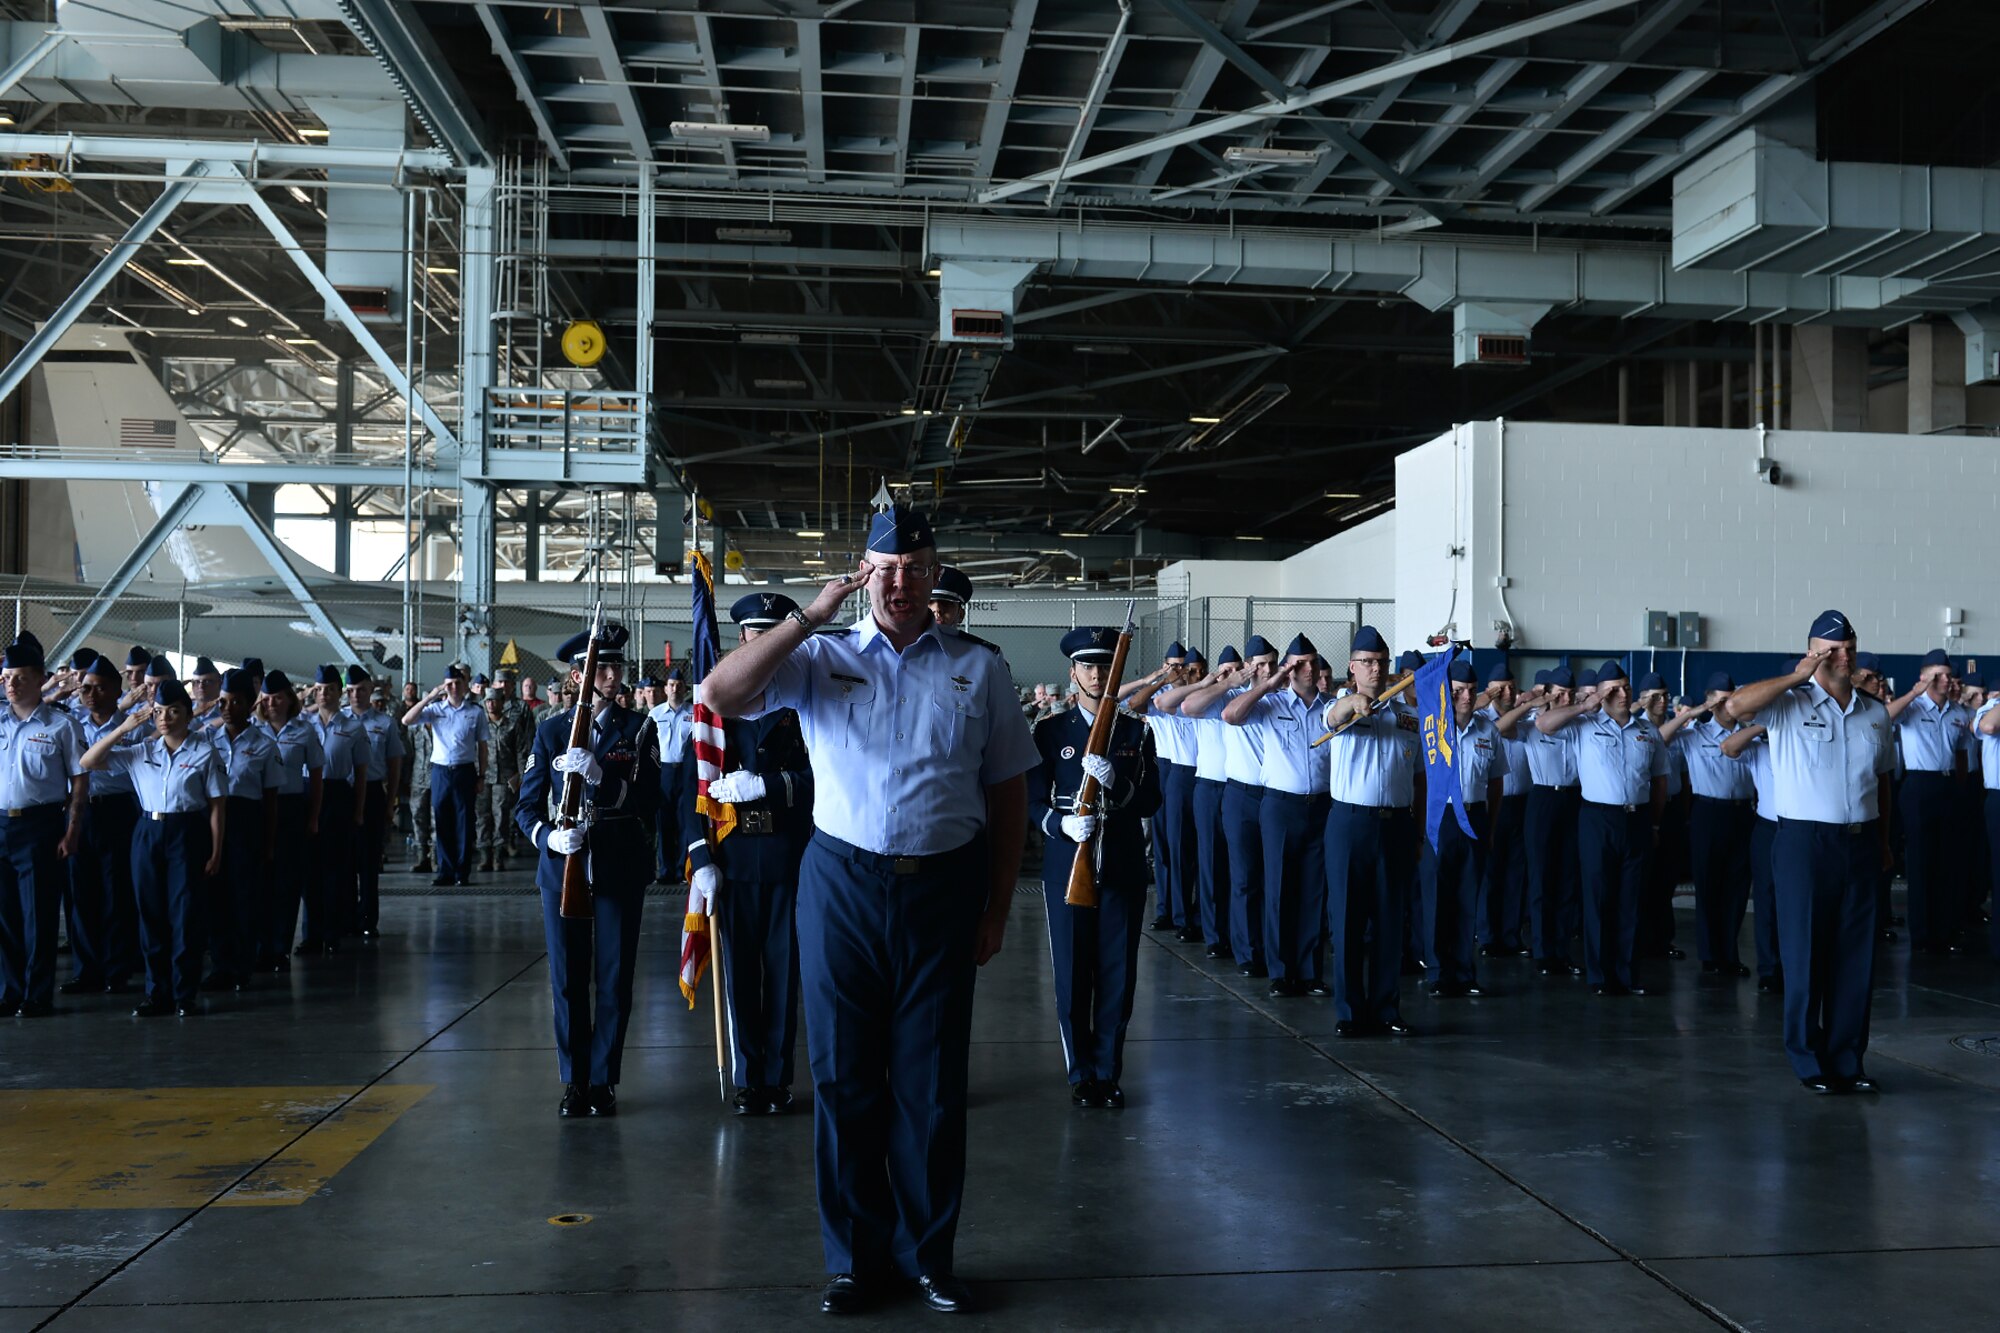 Col. David Berg, 55th Wing vice commander, leads a formation during the 55th Wing change of command ceremony in Dock 1 of the Bennie Davis Maintenance Facility on Offutt Air Force Base, Neb., June 8. The Fightin' Fifty-Fifth said farewell to Col. Marty Reynolds and welcomed Col. Michael Manion.